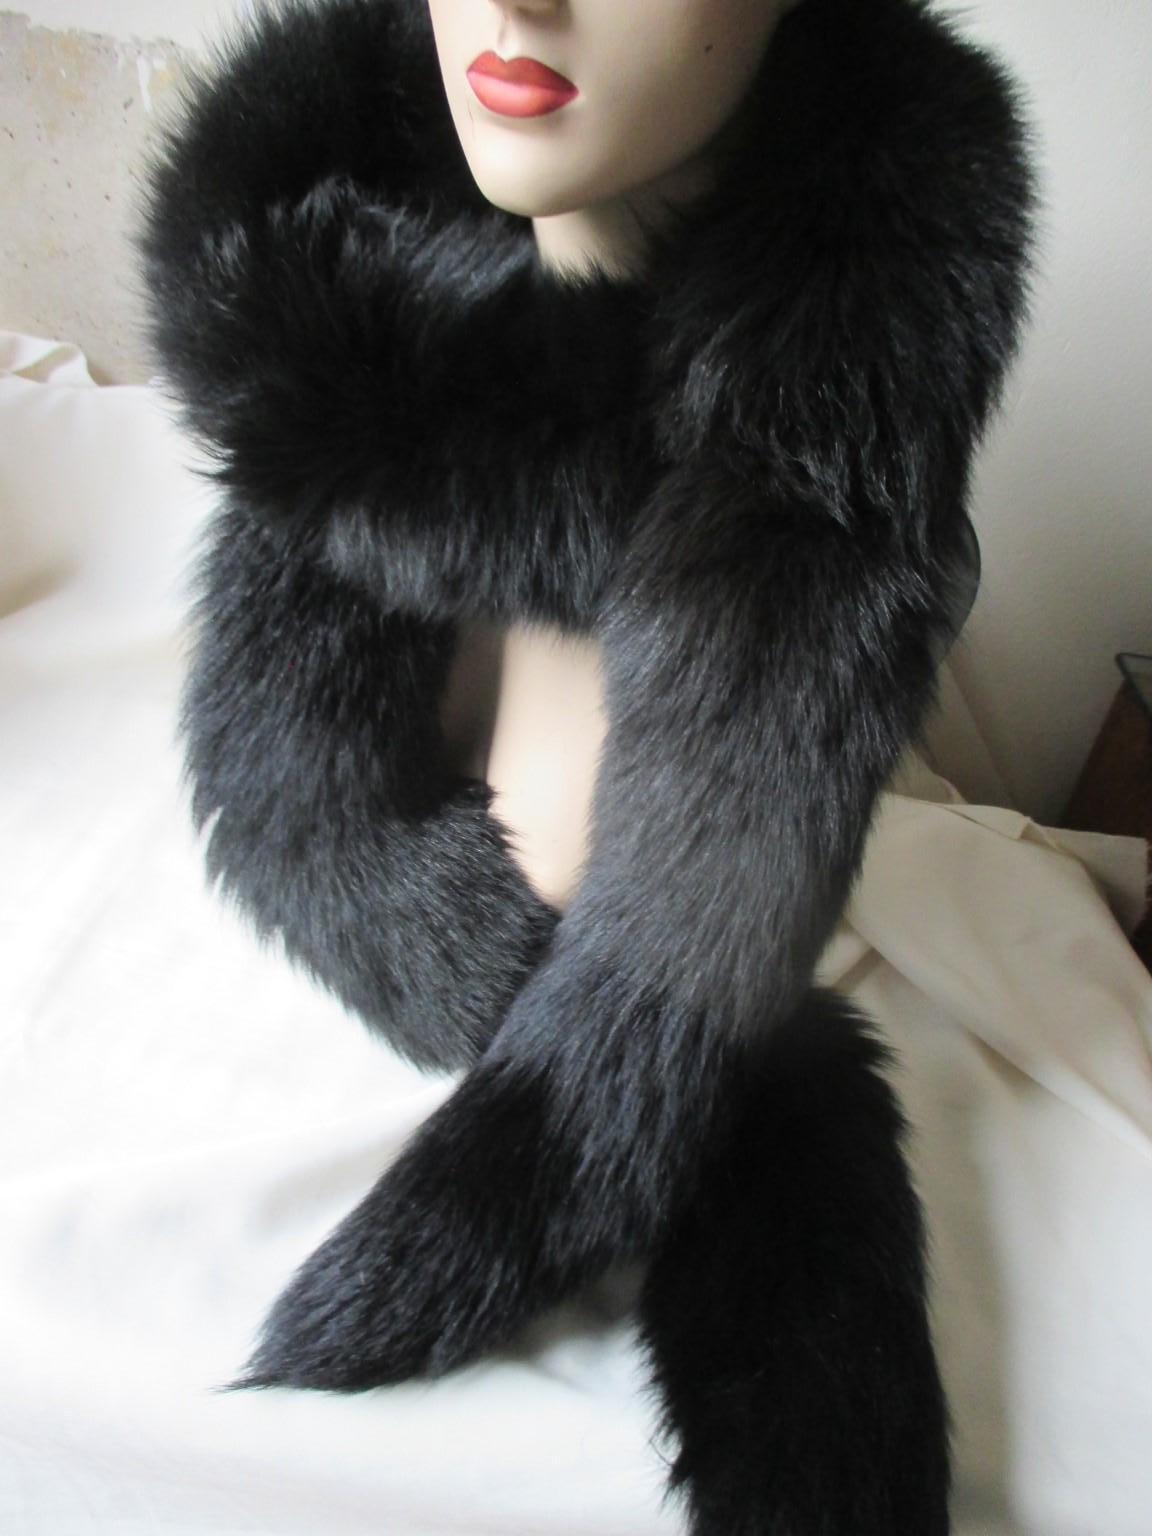 Very nice long black soft vintage fox fur stole.
Size 215 cm/ 84.64 inch

Please note that vintage items are not new and therefore might have minor imperfections.